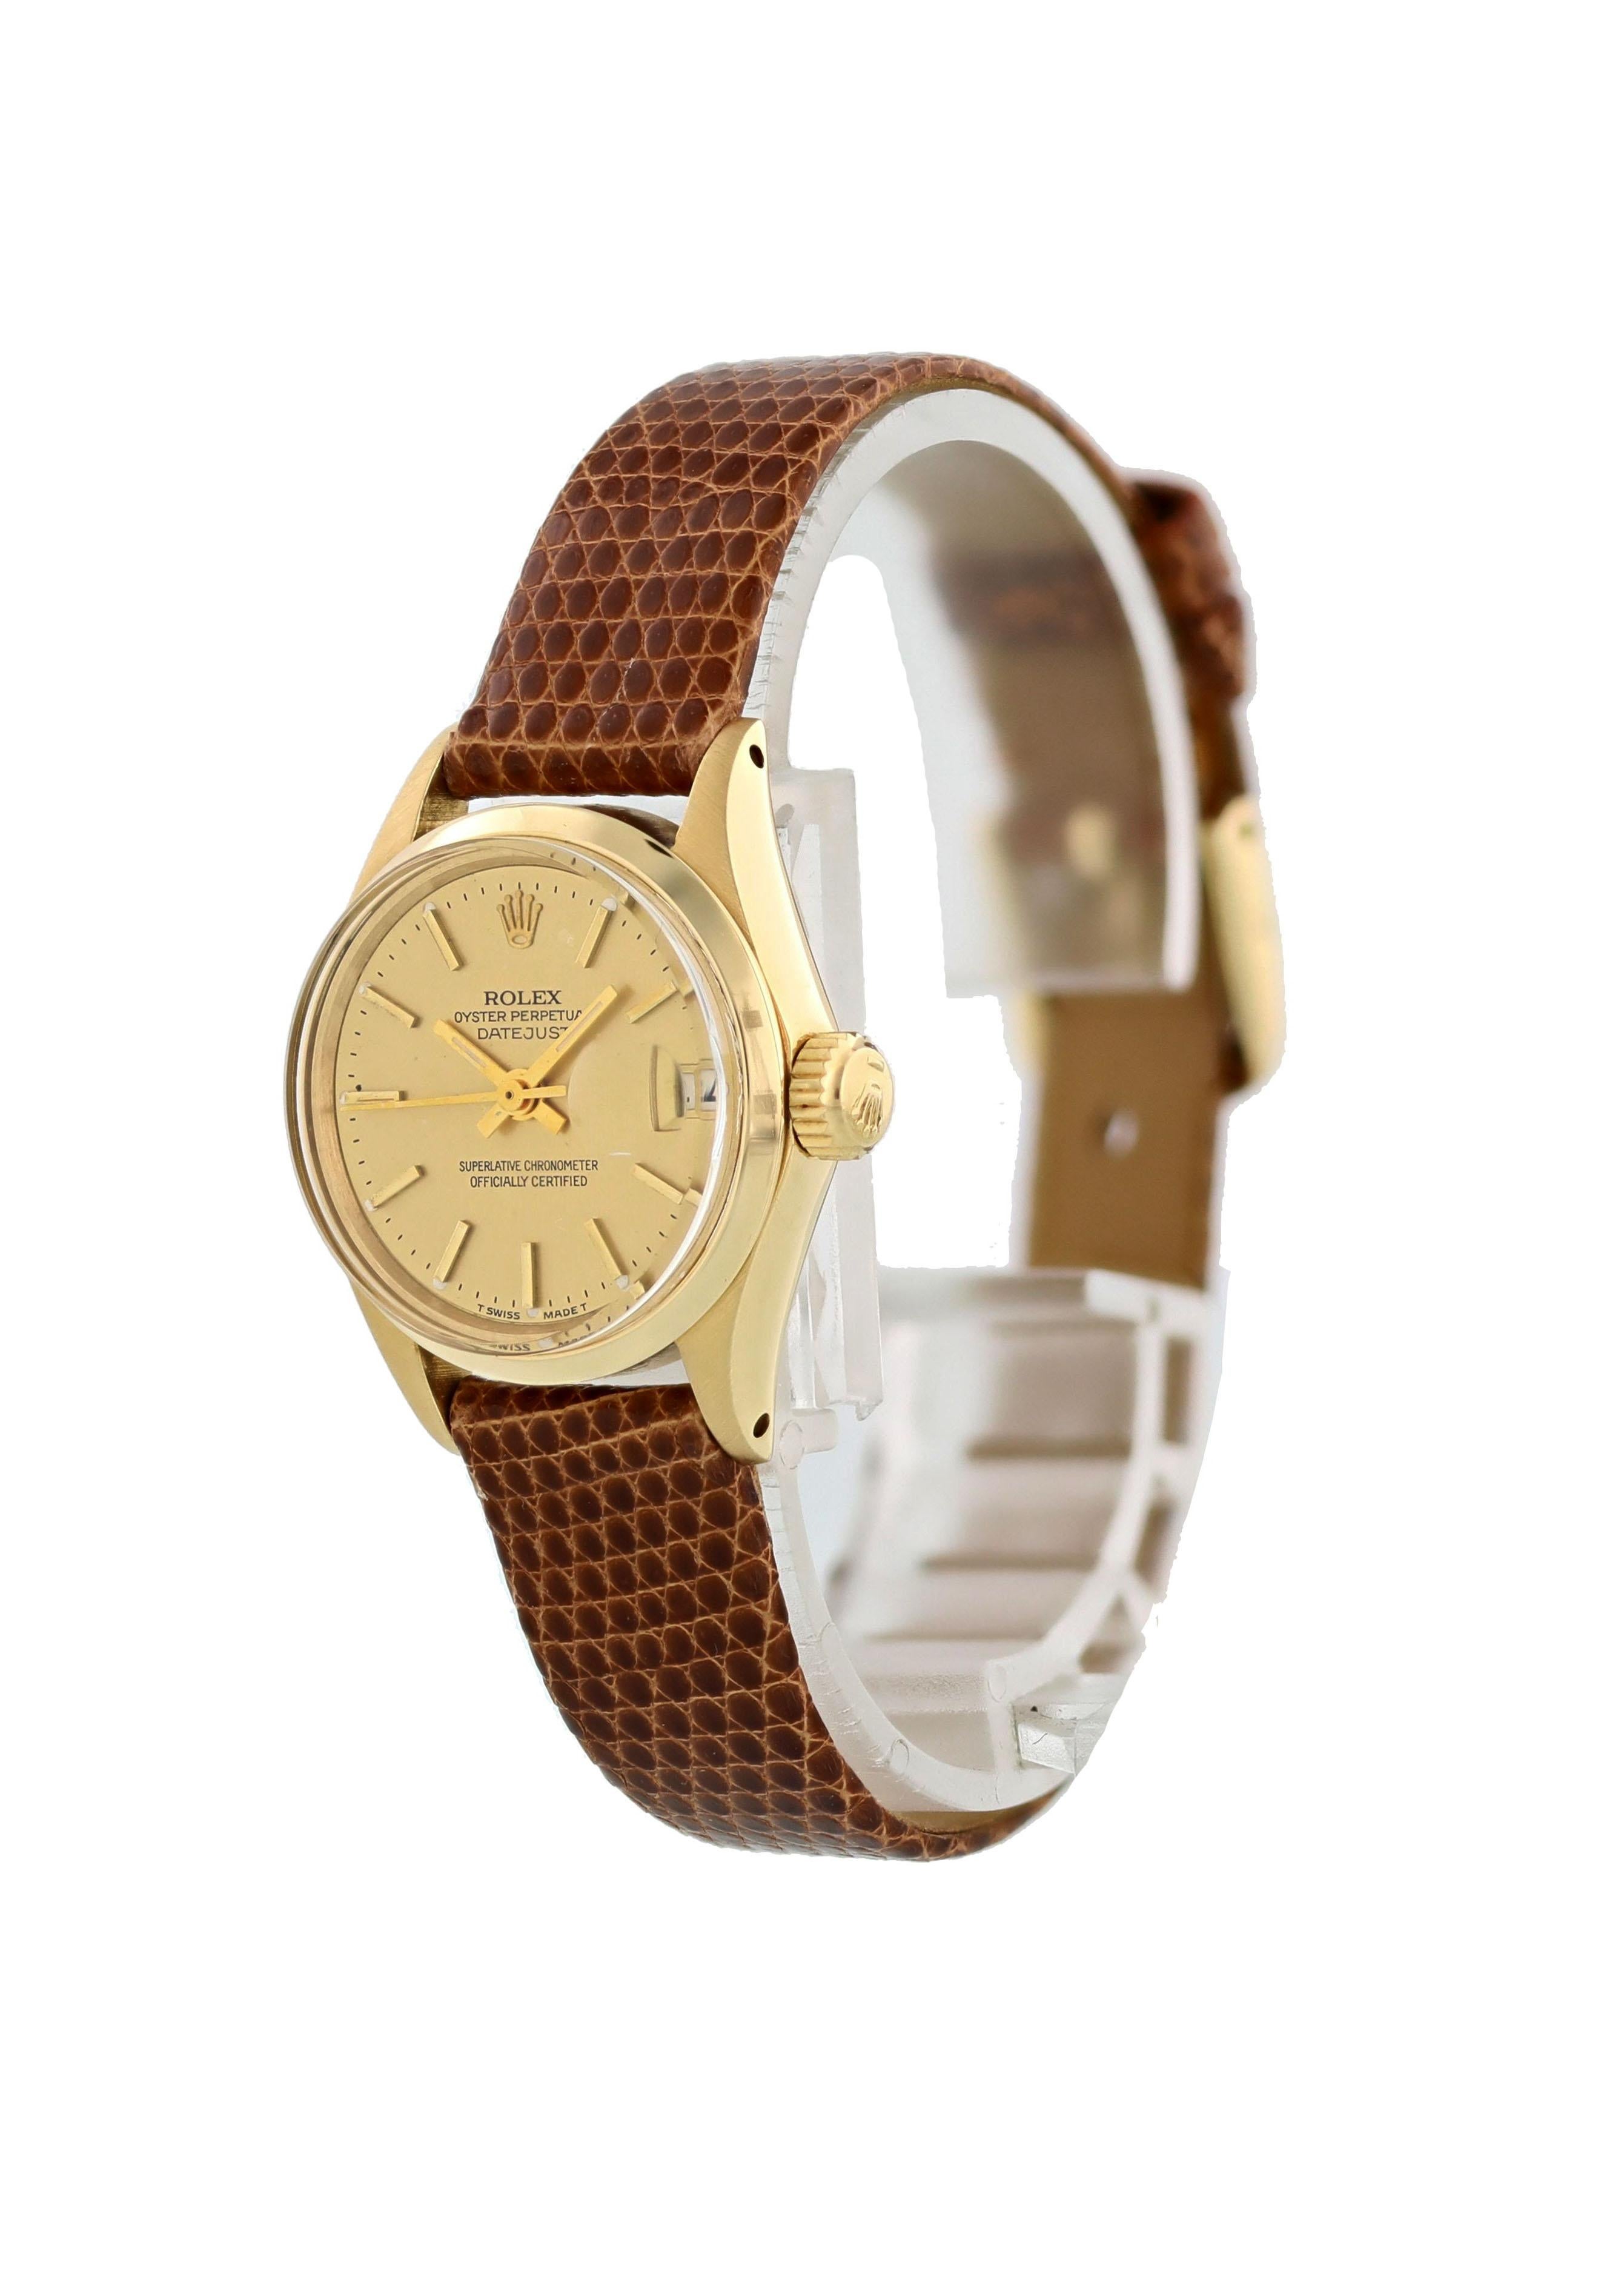 Rolex Oyster Perpetual Date 6516 Ladies Watch. 25 mm stainless steel case. 18k yellow gold smooth bezel. Champagne dial with yellow gold hands and markers. Minute marker on the outer dial. Date display at 3 o'clock position. Brown Lizard Grain Strap